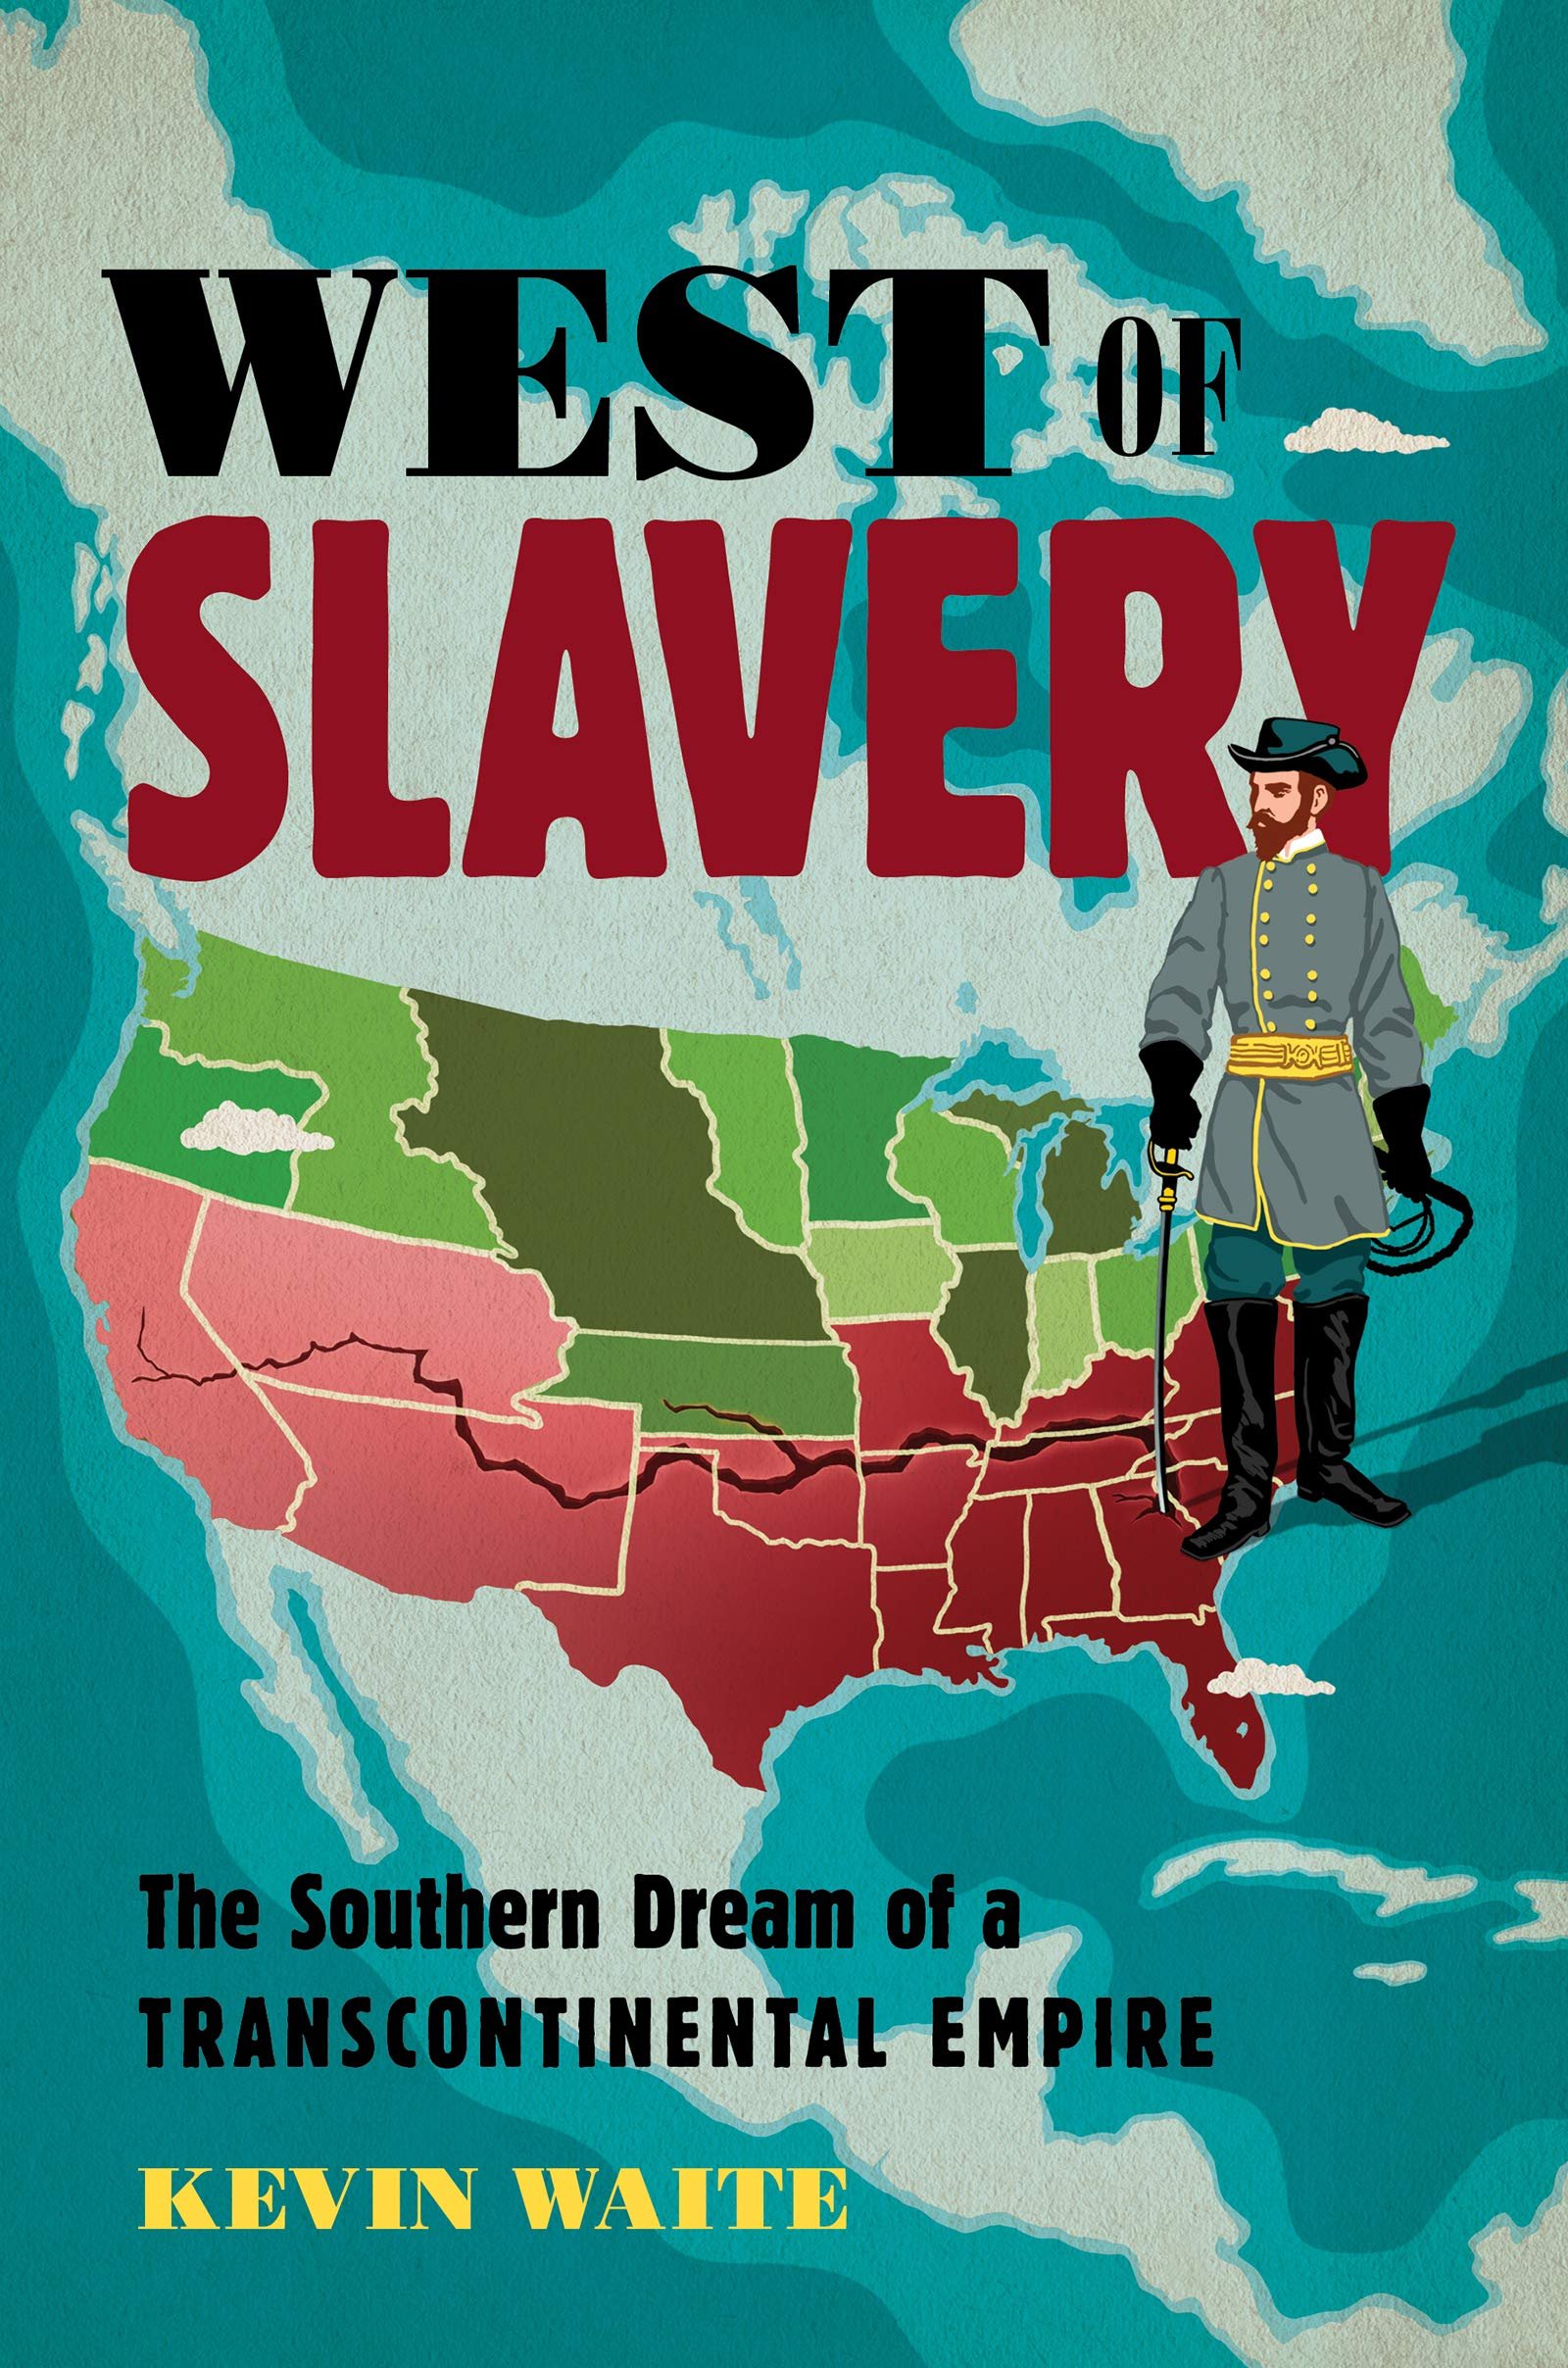 Civil War Monitor - West of Slavery (Kevin Waite)